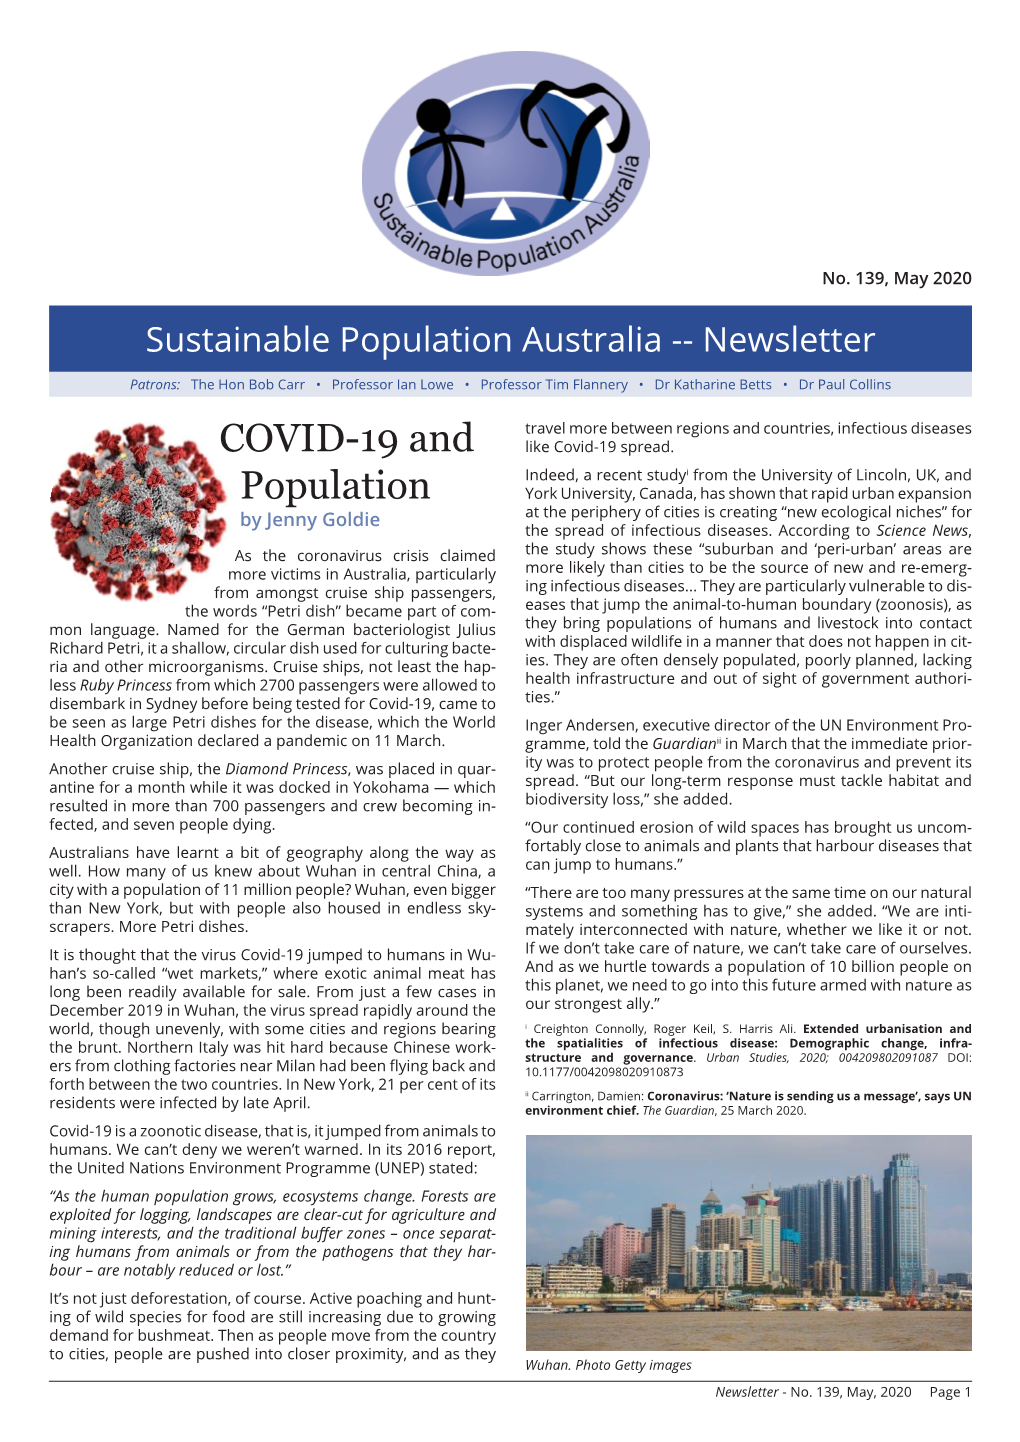 COVID-19 and Population